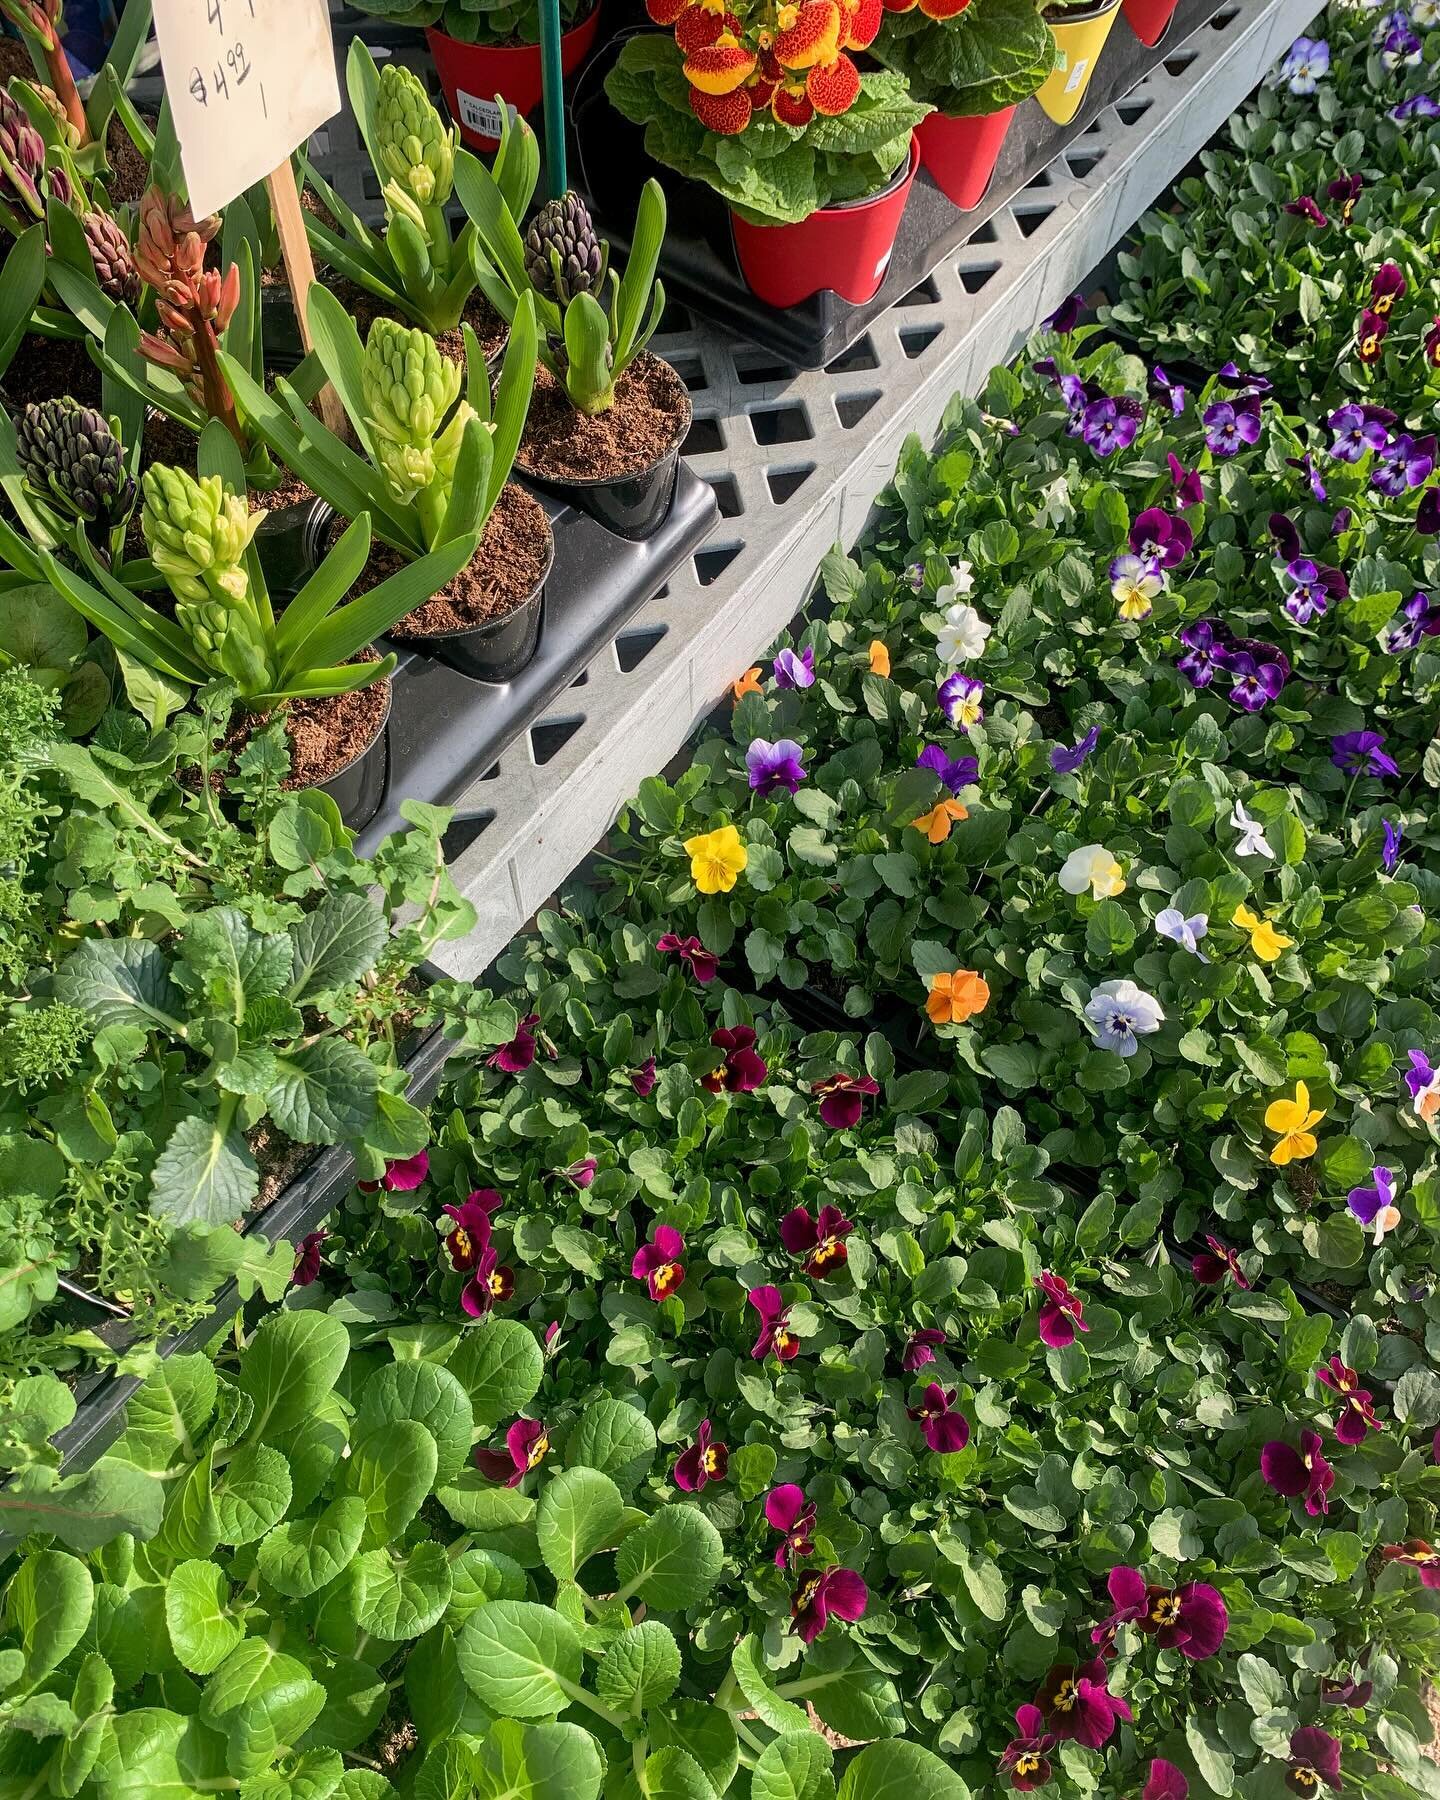 All this warm weather☀️ has us thinking about spring! Get in the spirit with some cool weather plants 🌸🍀🌼☘️🪴NOW in: shamrocks, calceolaria, violas, and some veggies!